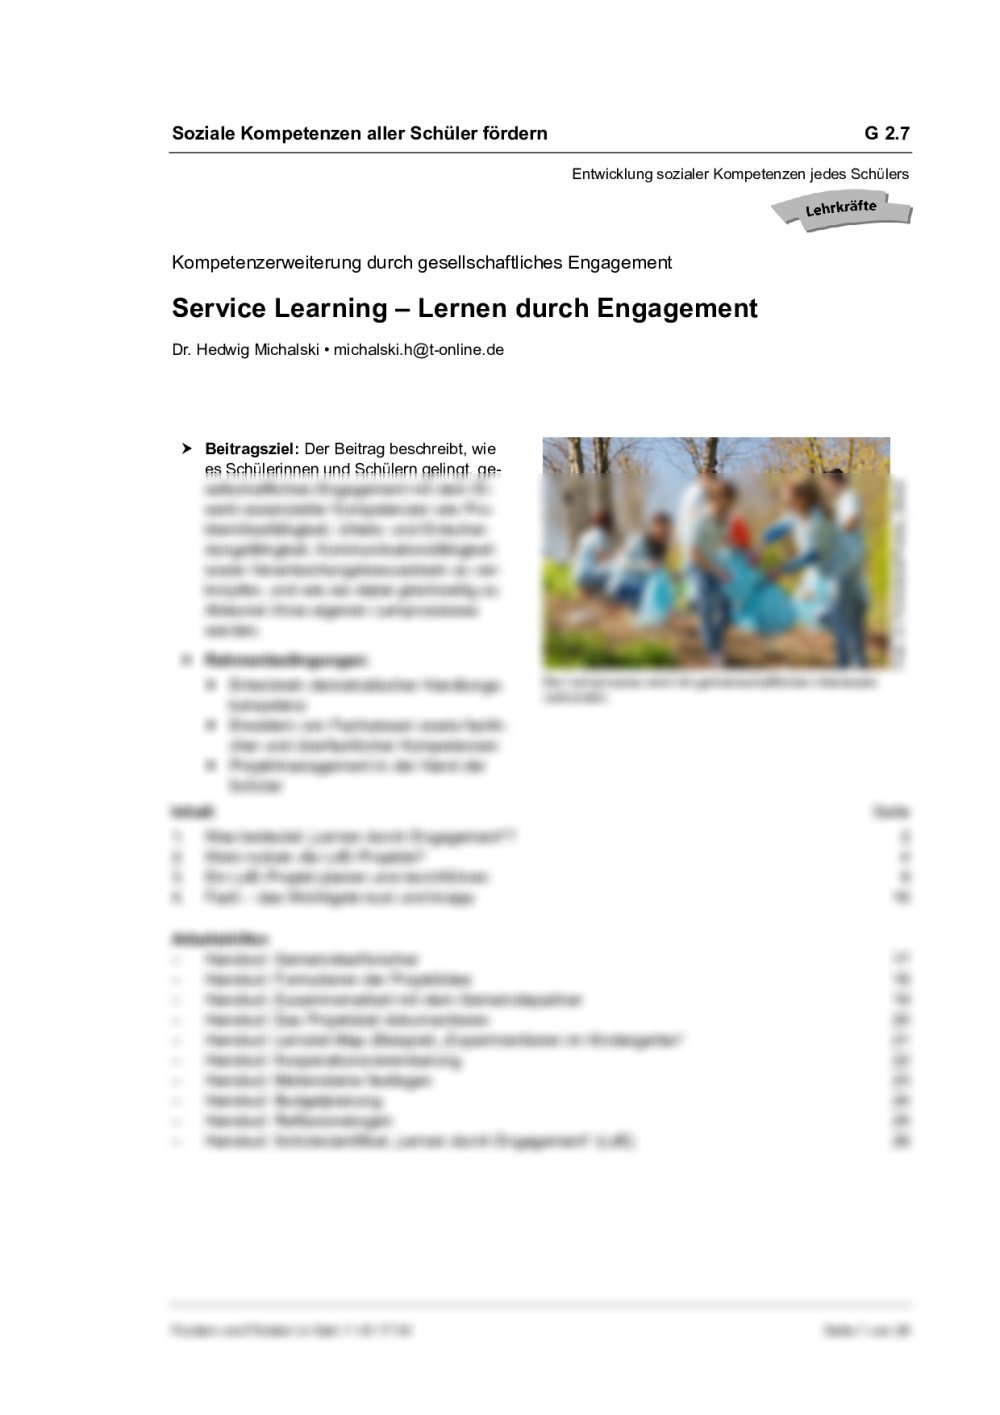 Service Learning – Lernen durch Engagement - Seite 1